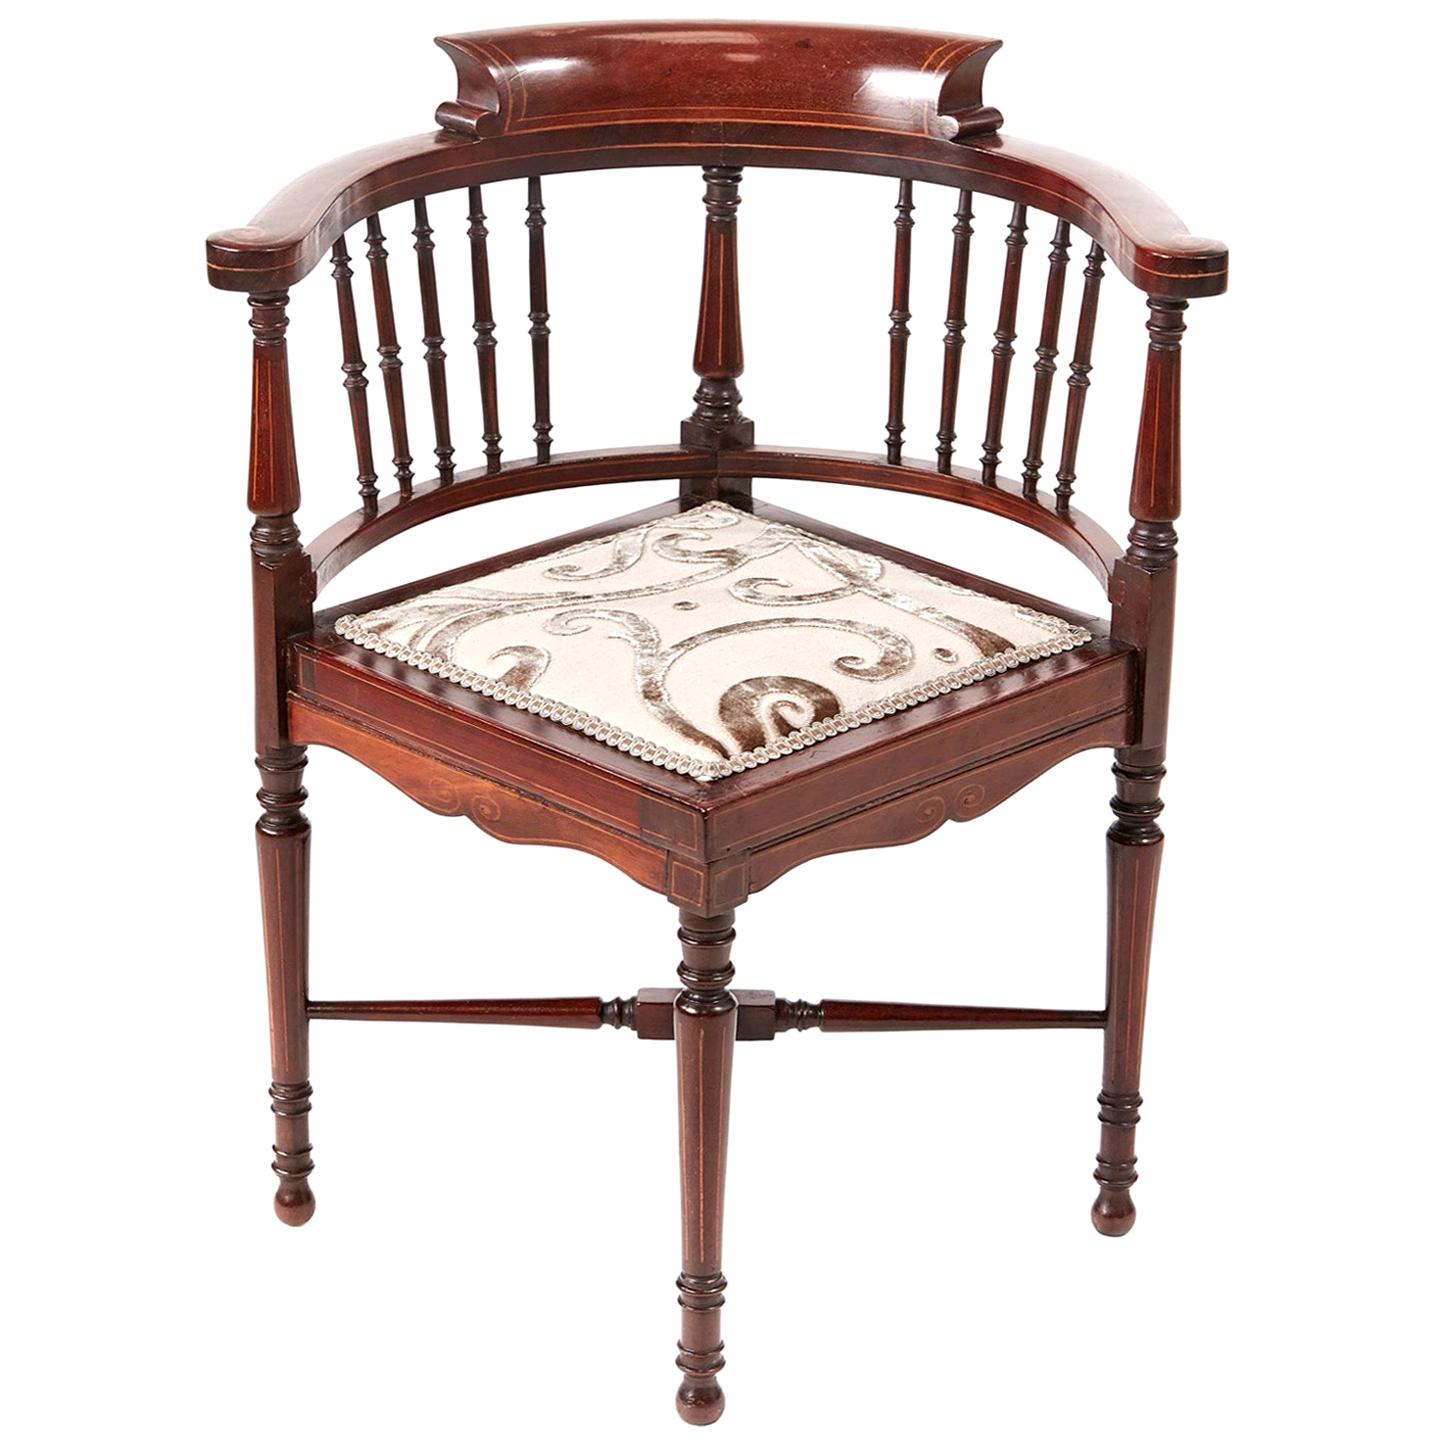 Quality Victorian Edwardian Mahogany Inlaid Corner Chair For Sale